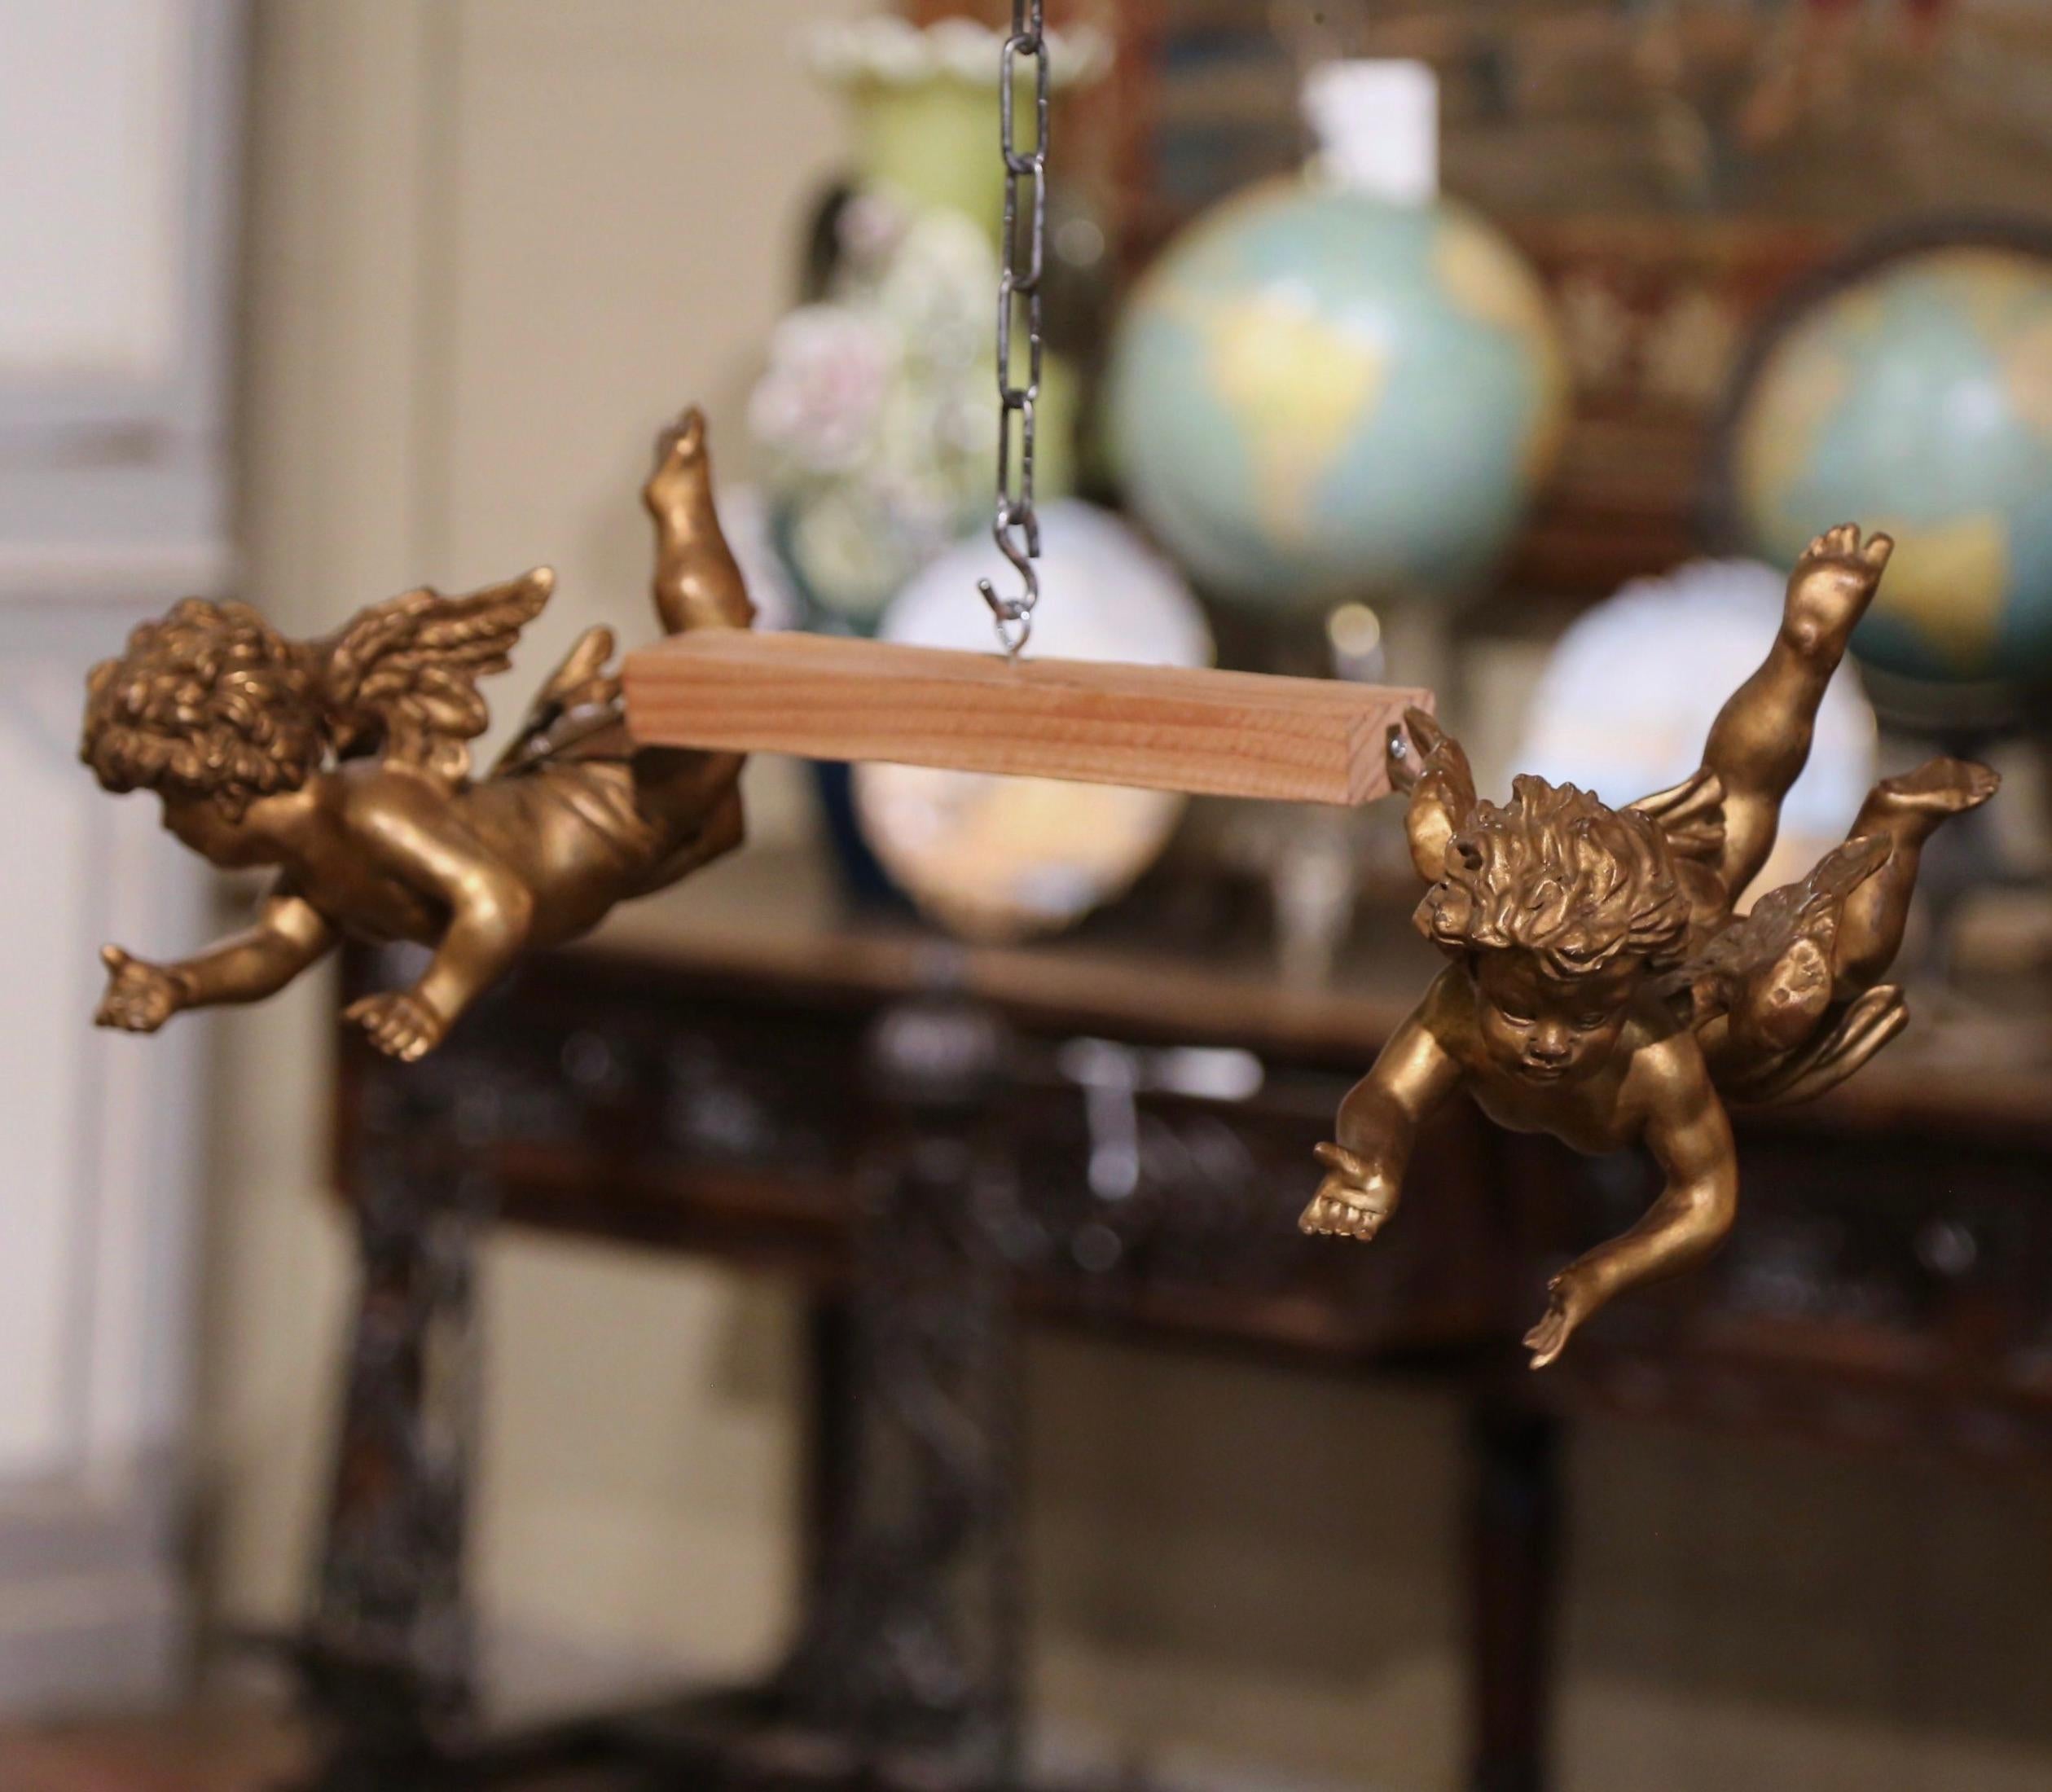 These antique winged wall cherub figures were crafted in Italy, circa 1880. The hand-painted putti carvings feature their original paint and gold leaf finish for a luxurious result. The hand carved chubby cherubs are expressive in their movement and